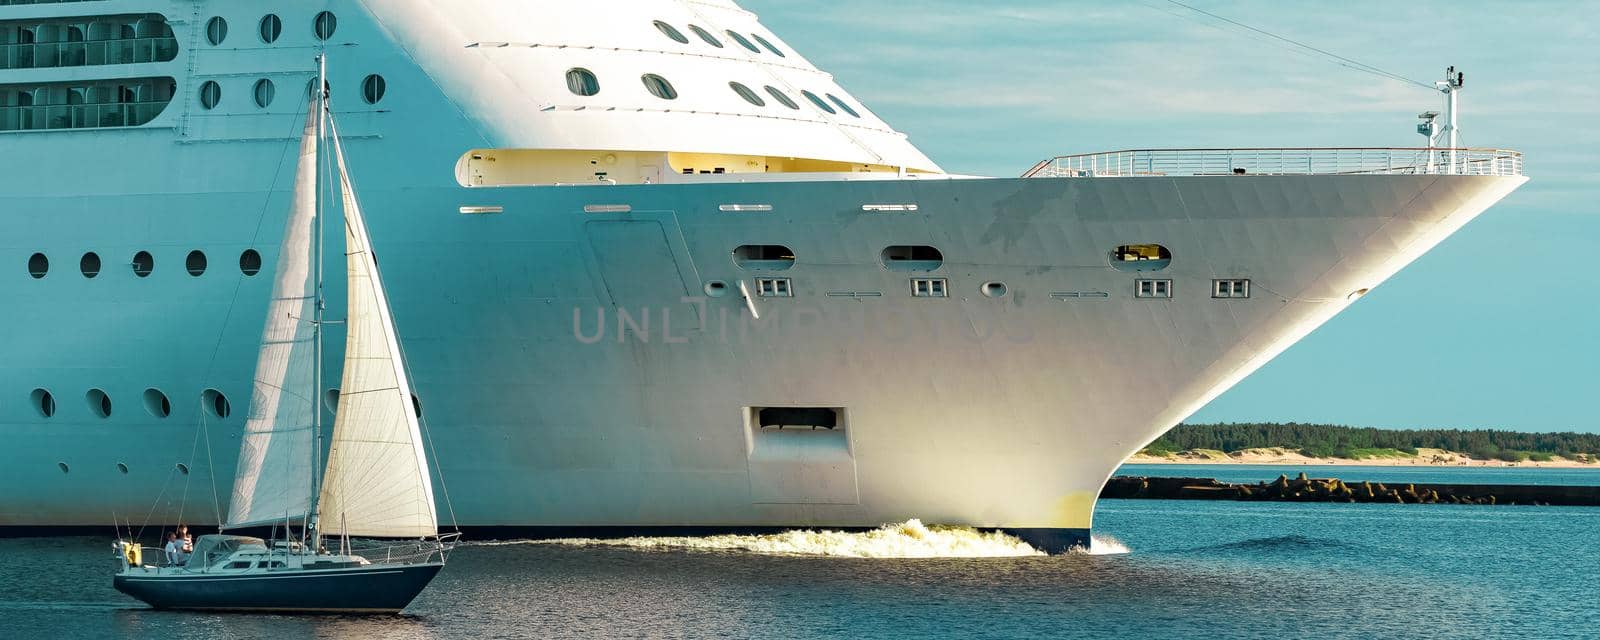 Luxury cruise liner in travel by InfinitumProdux